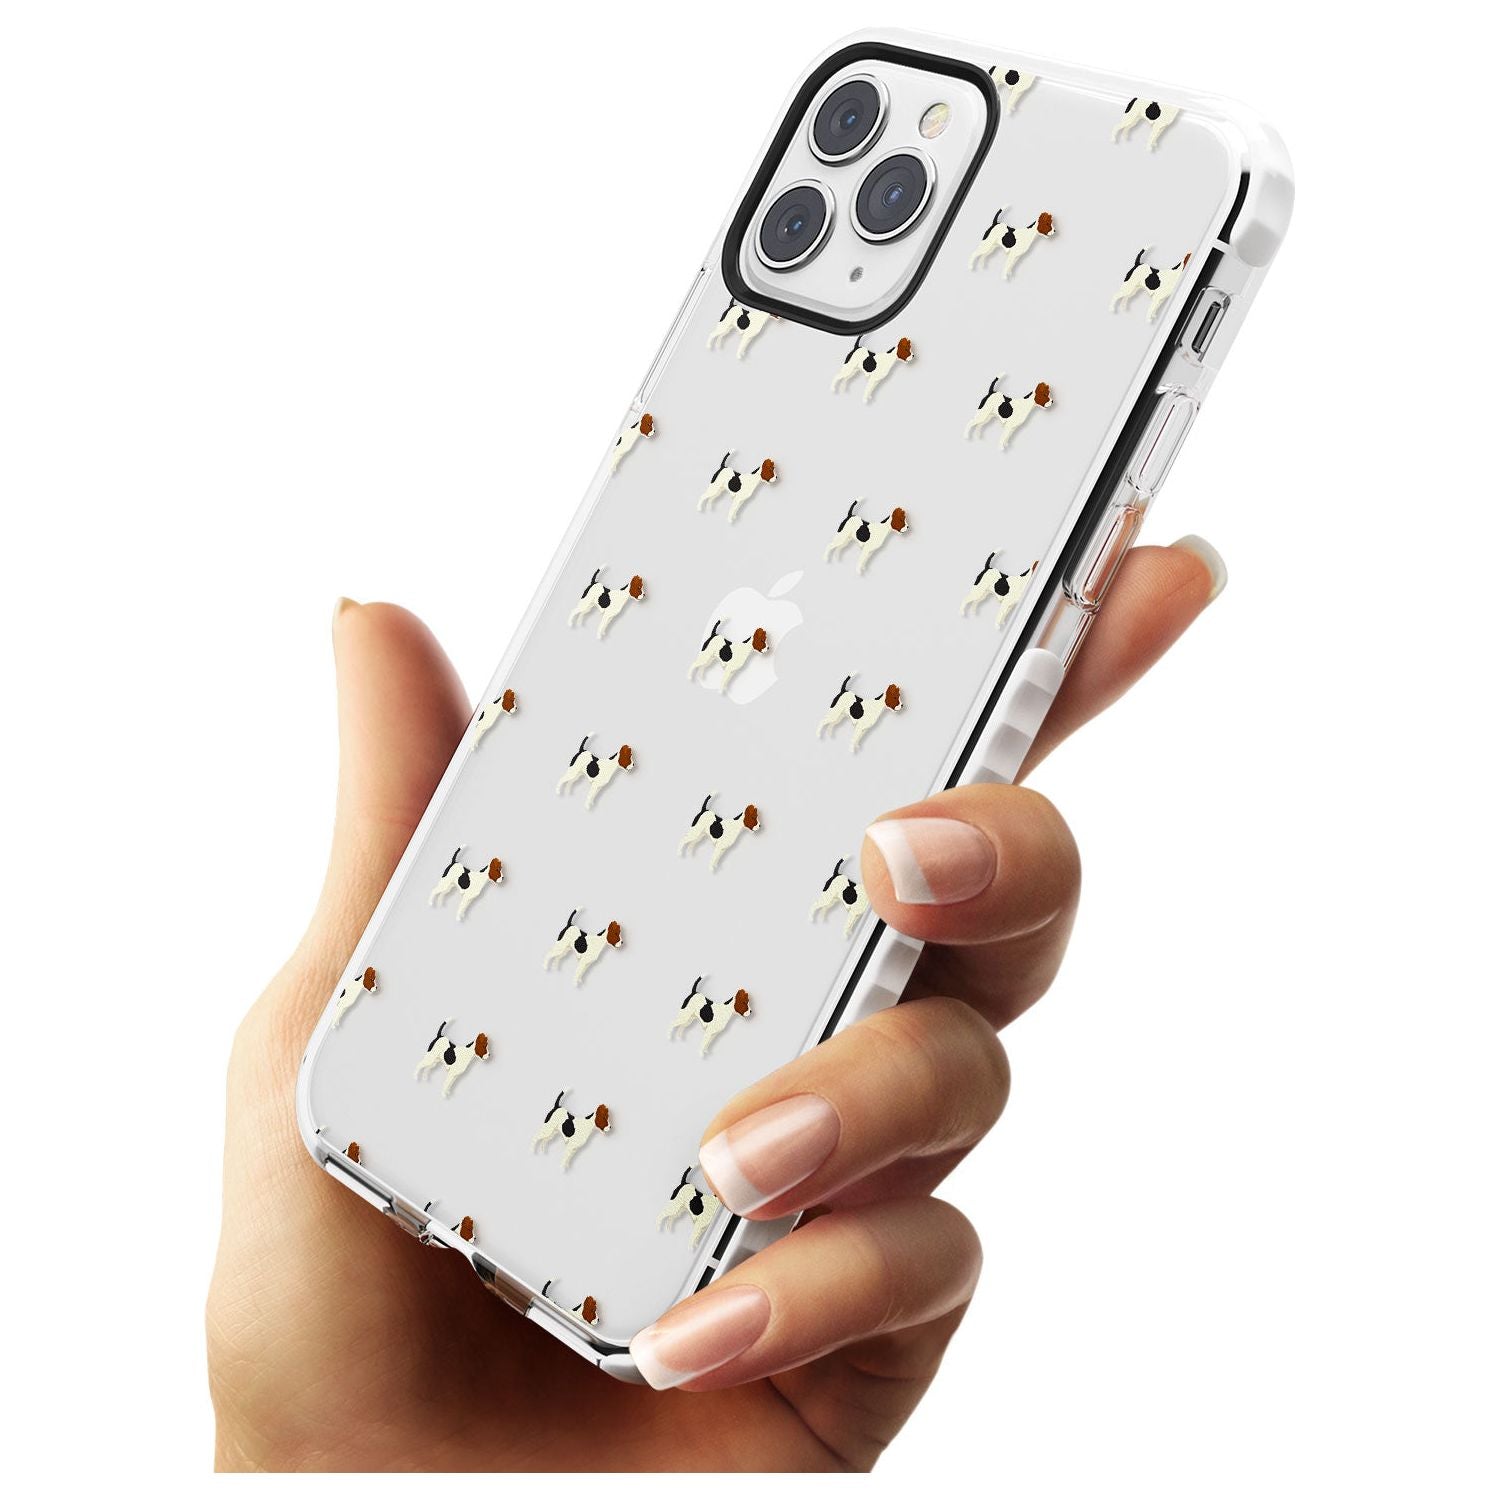 Jack Russell Terrier Dog Pattern Clear Impact Phone Case for iPhone 11 Pro Max